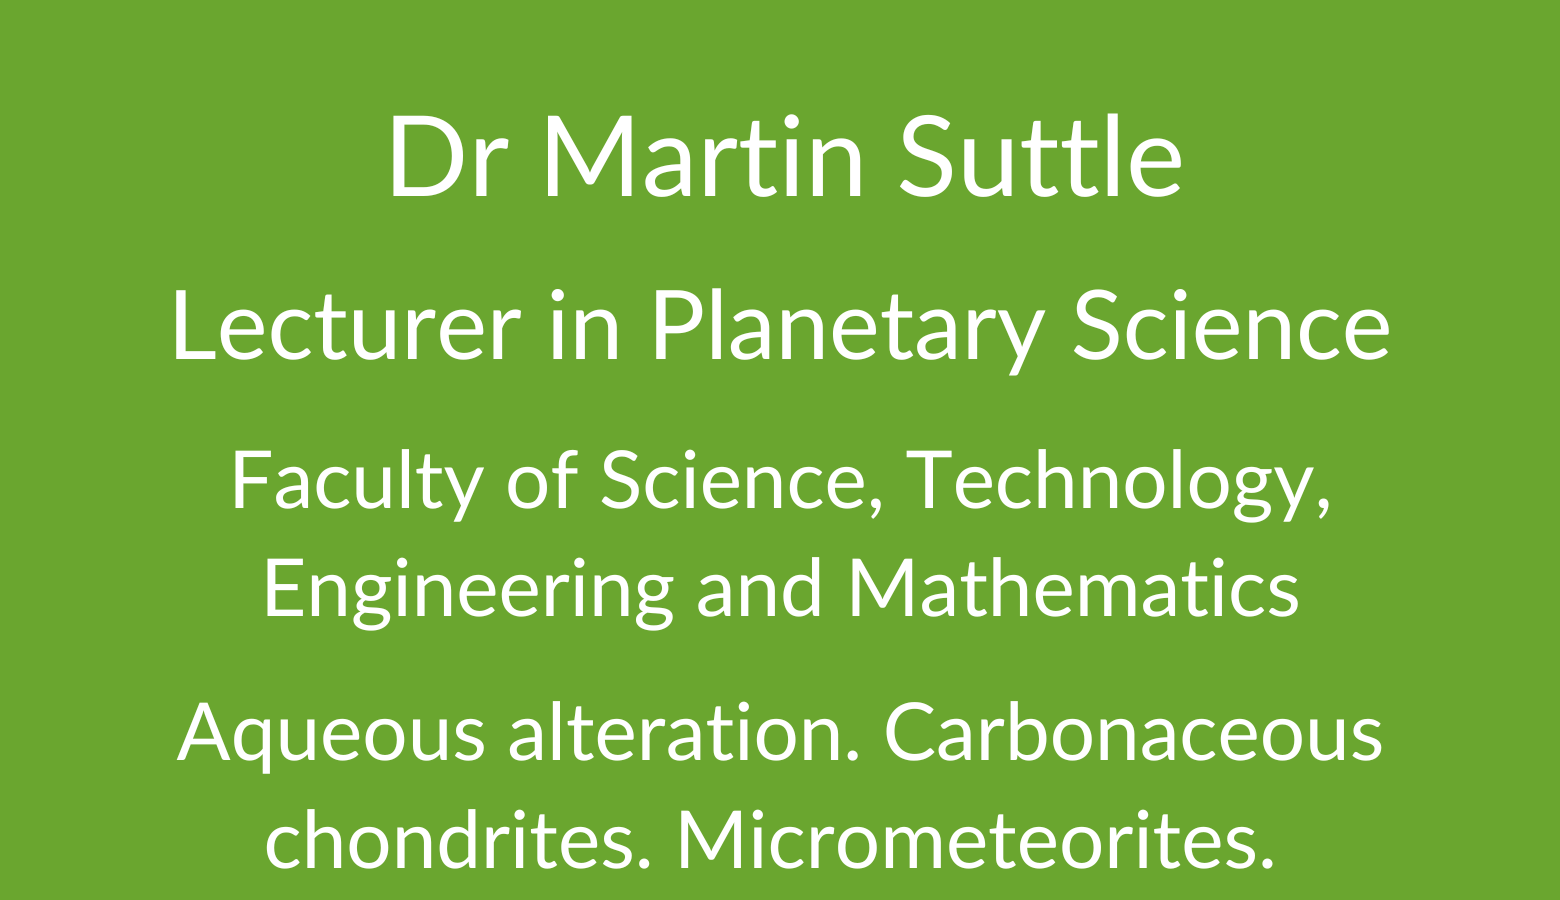 Dr Martin Suttle. Lecturer in Planetary Science. Faculty of Science. Technology, Engineering and Mathematics. Aqueous alteration. Carbonaceous chondrites. Micrometeorites. .